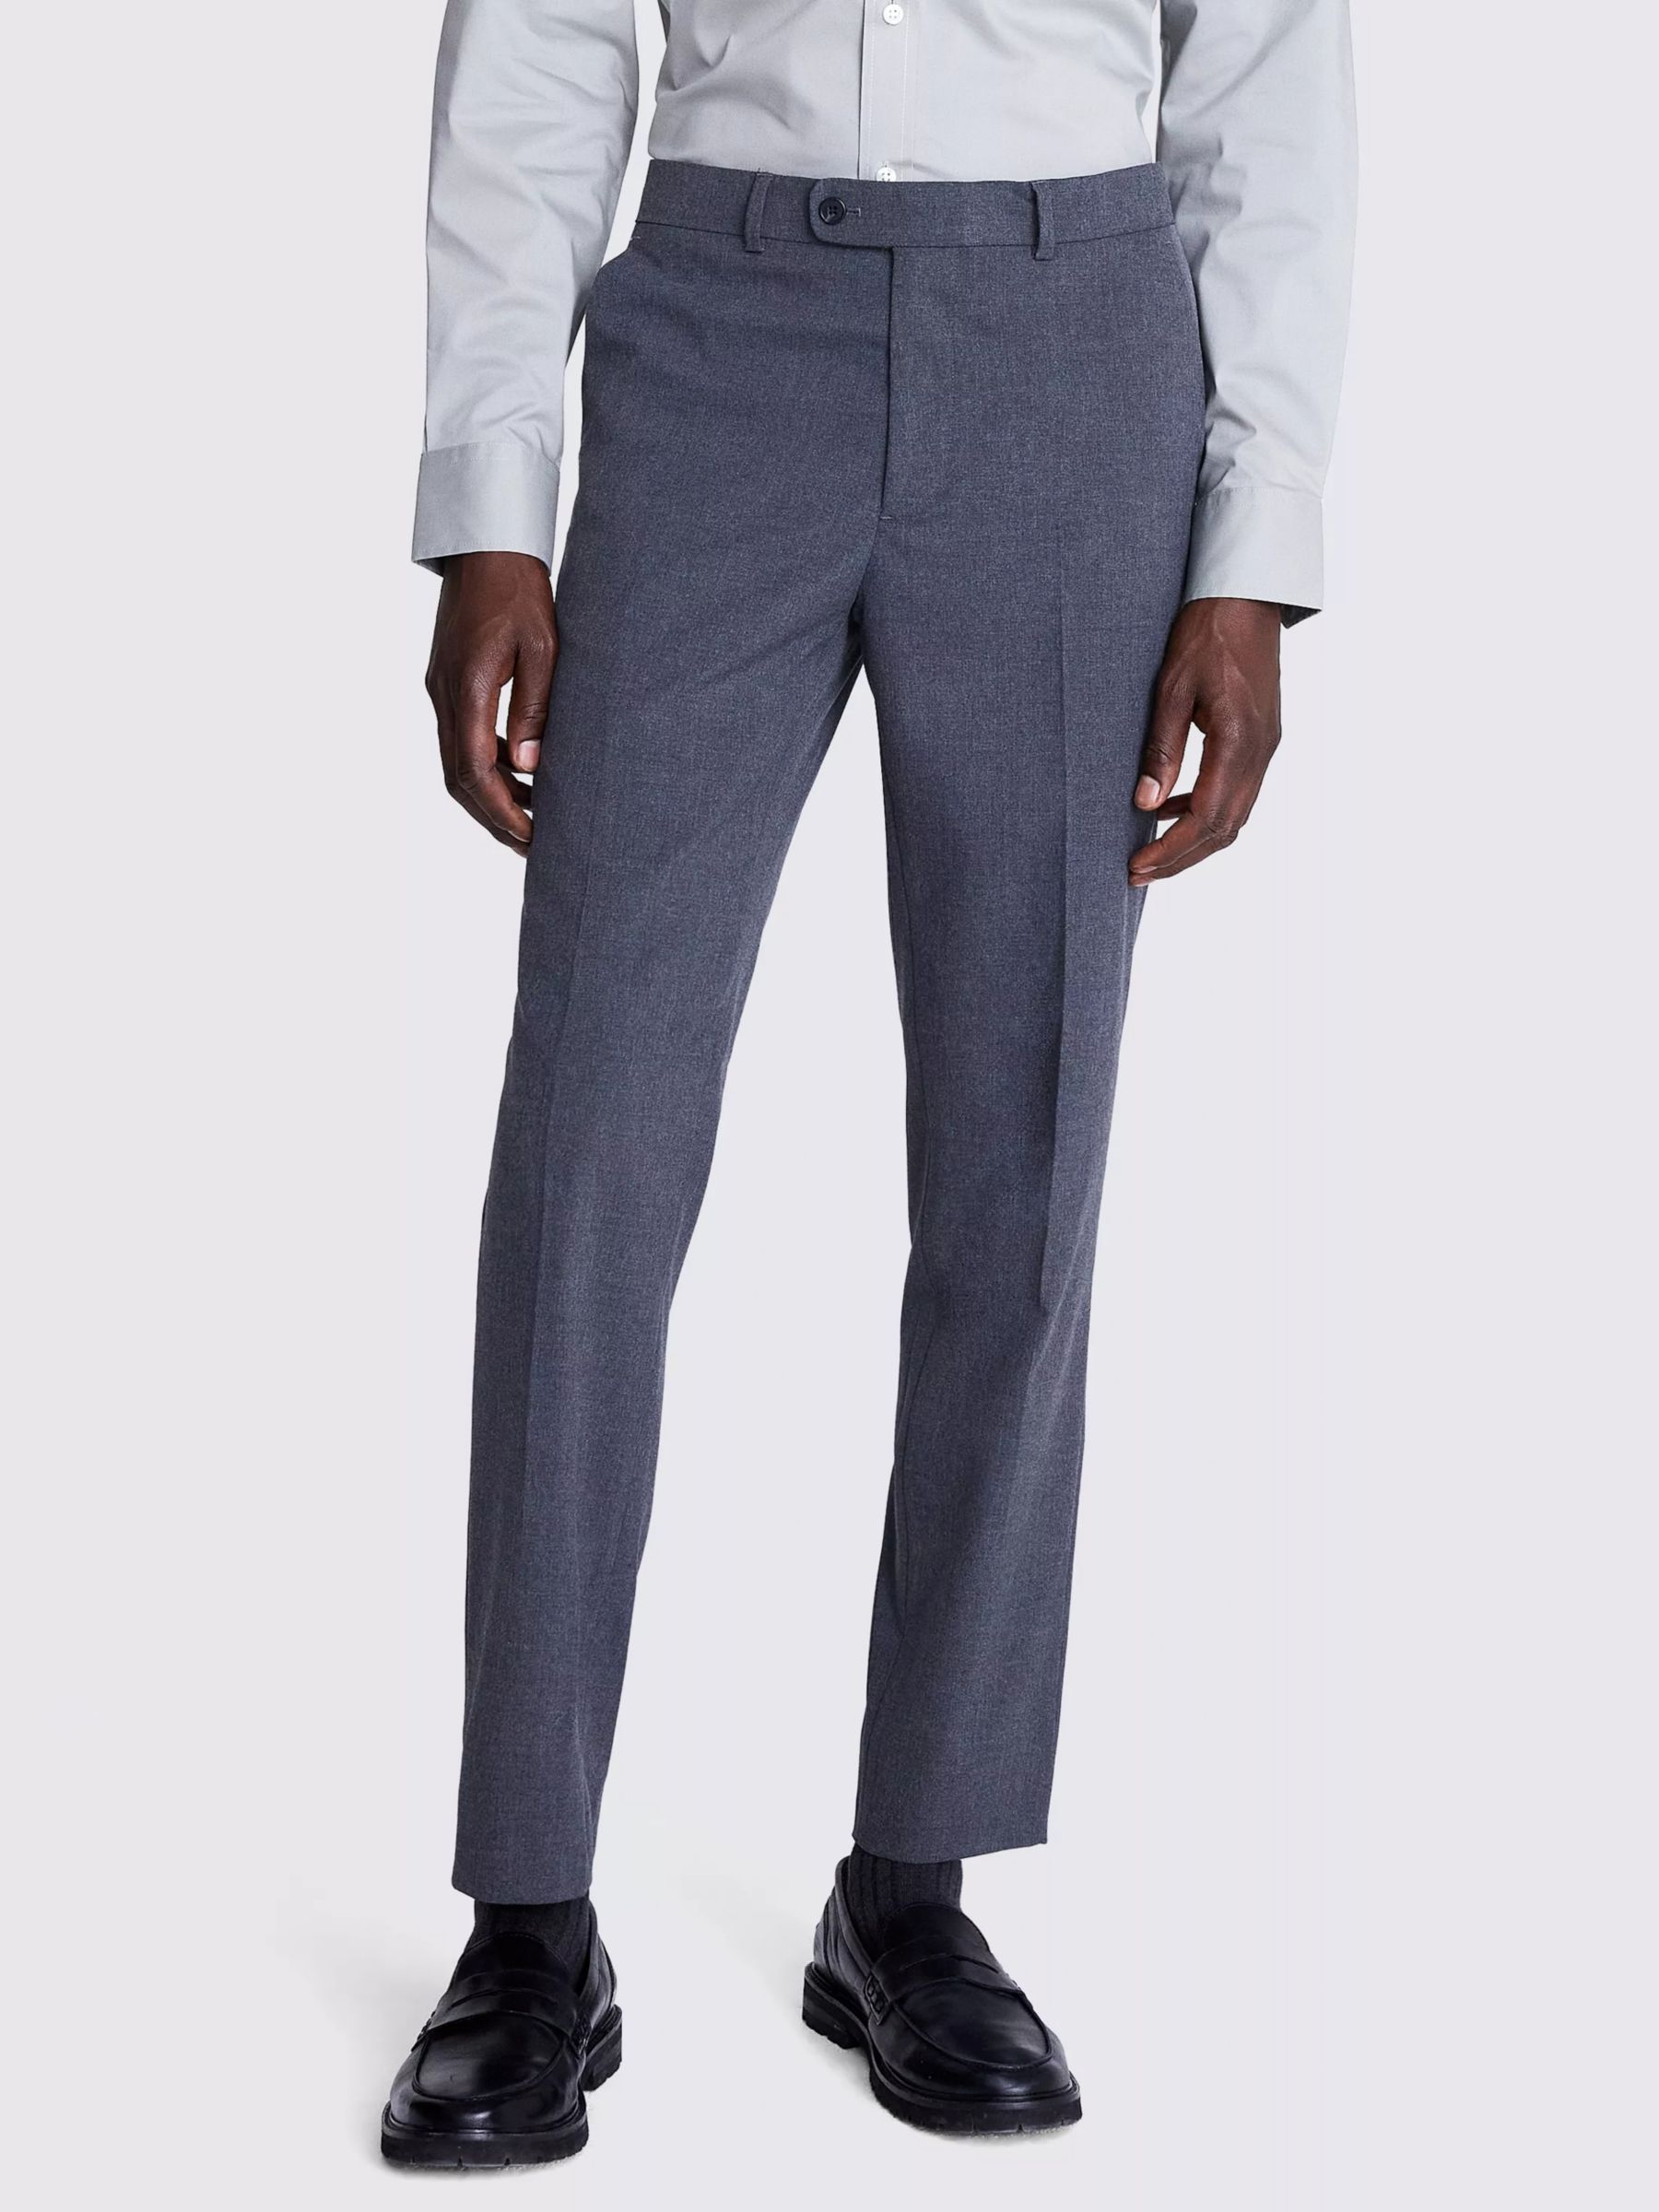 Moss Tailored Fit Trousers, Grey, 28R